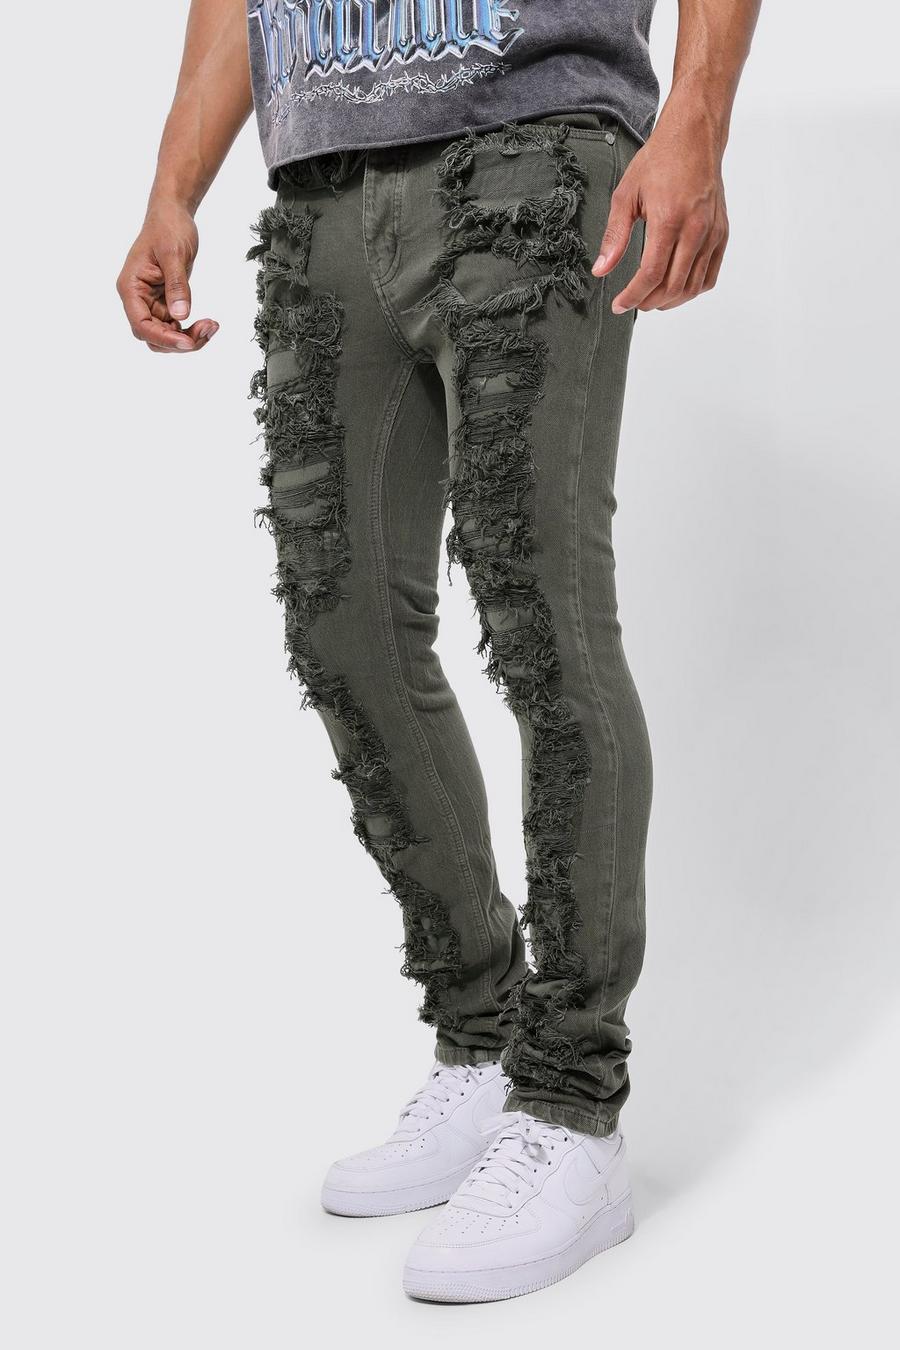 Khaki Slim Fit Ripped Overdye Stacked Jeans